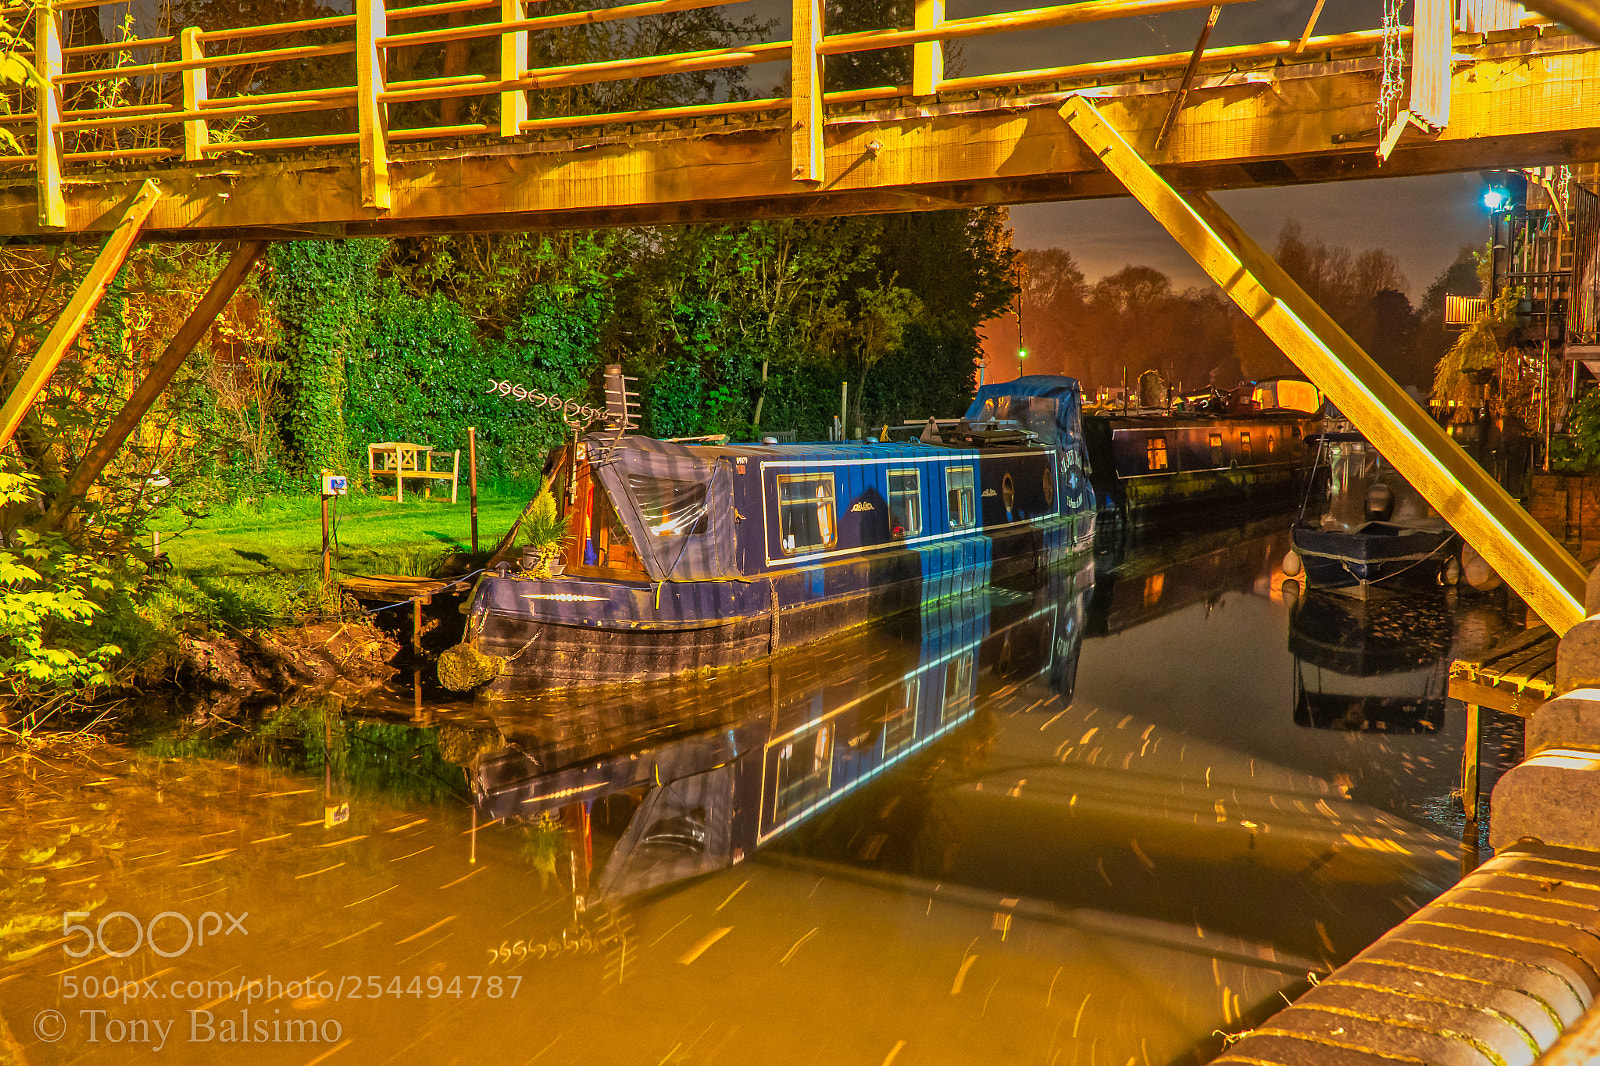 Sony a6300 sample photo. St neots river boat photography